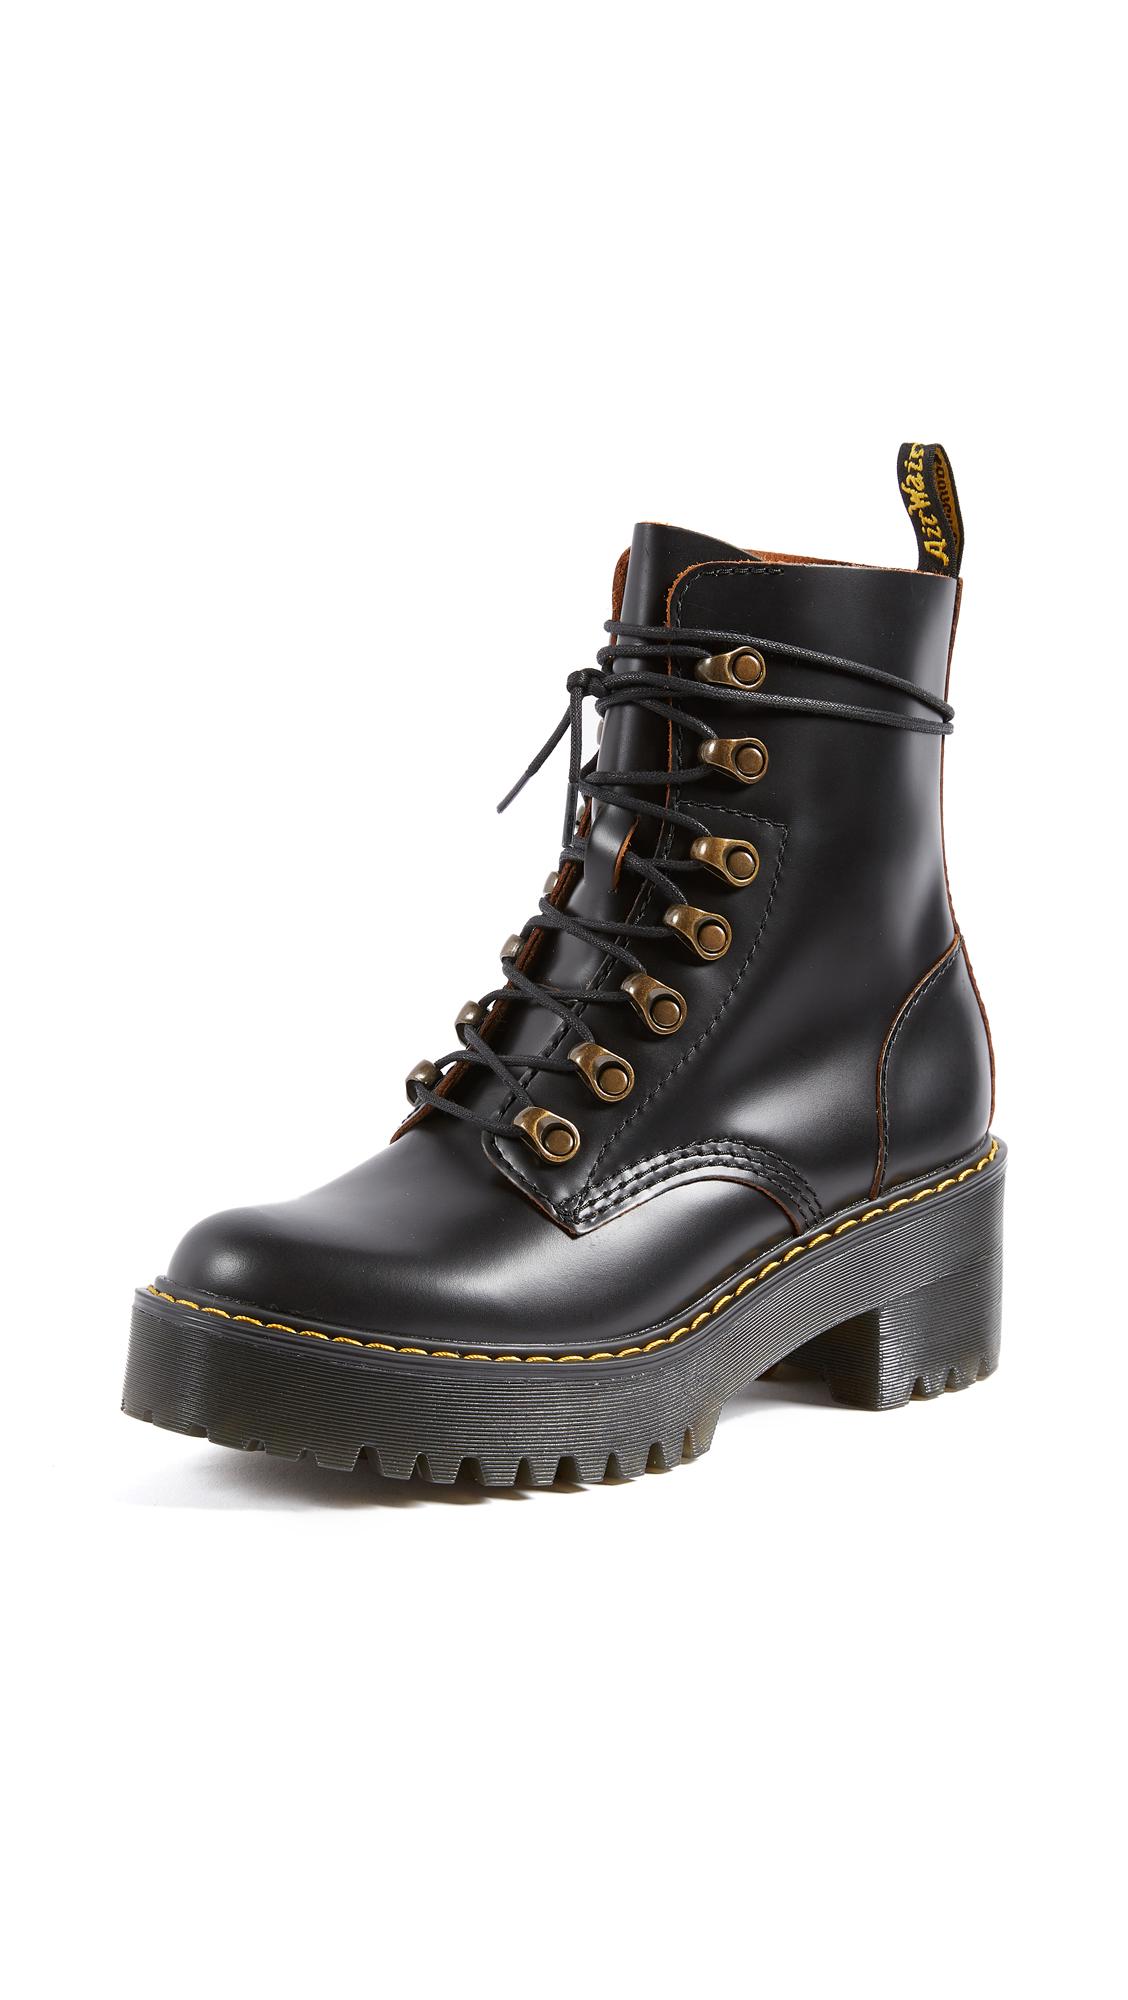 Dr. Martens Leona 7 Hook Boots in Black | Lyst